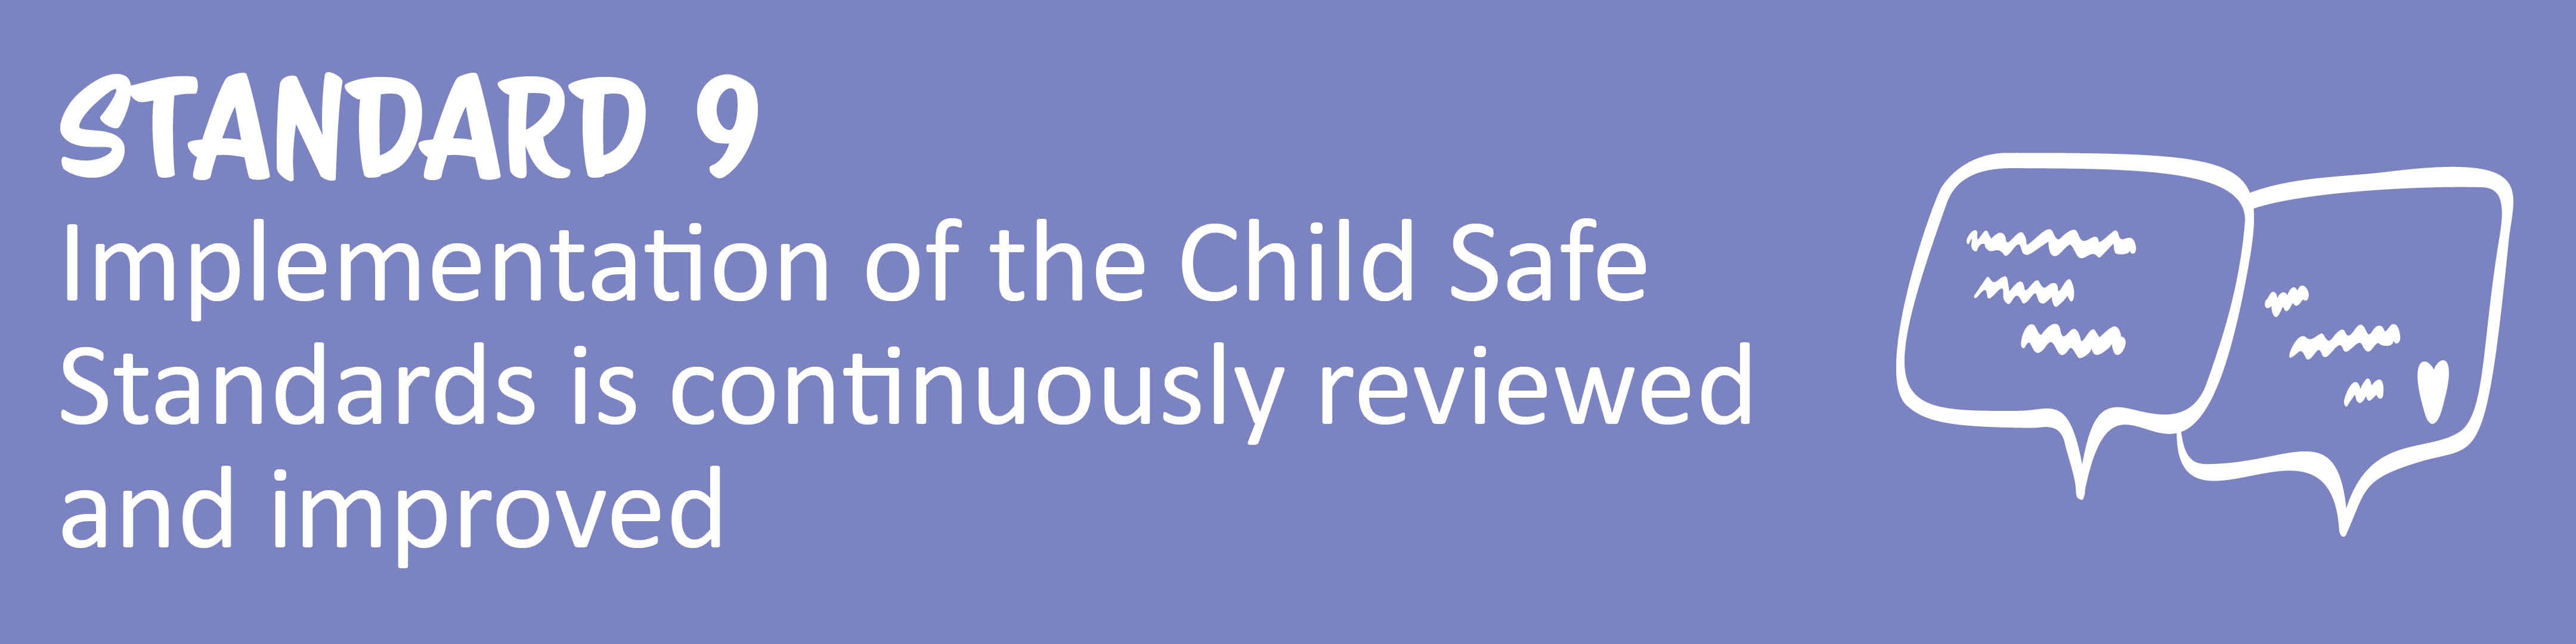 Child Safe Standard 9: Implementation of the Child safe Standards are continuously reviewed and improved
